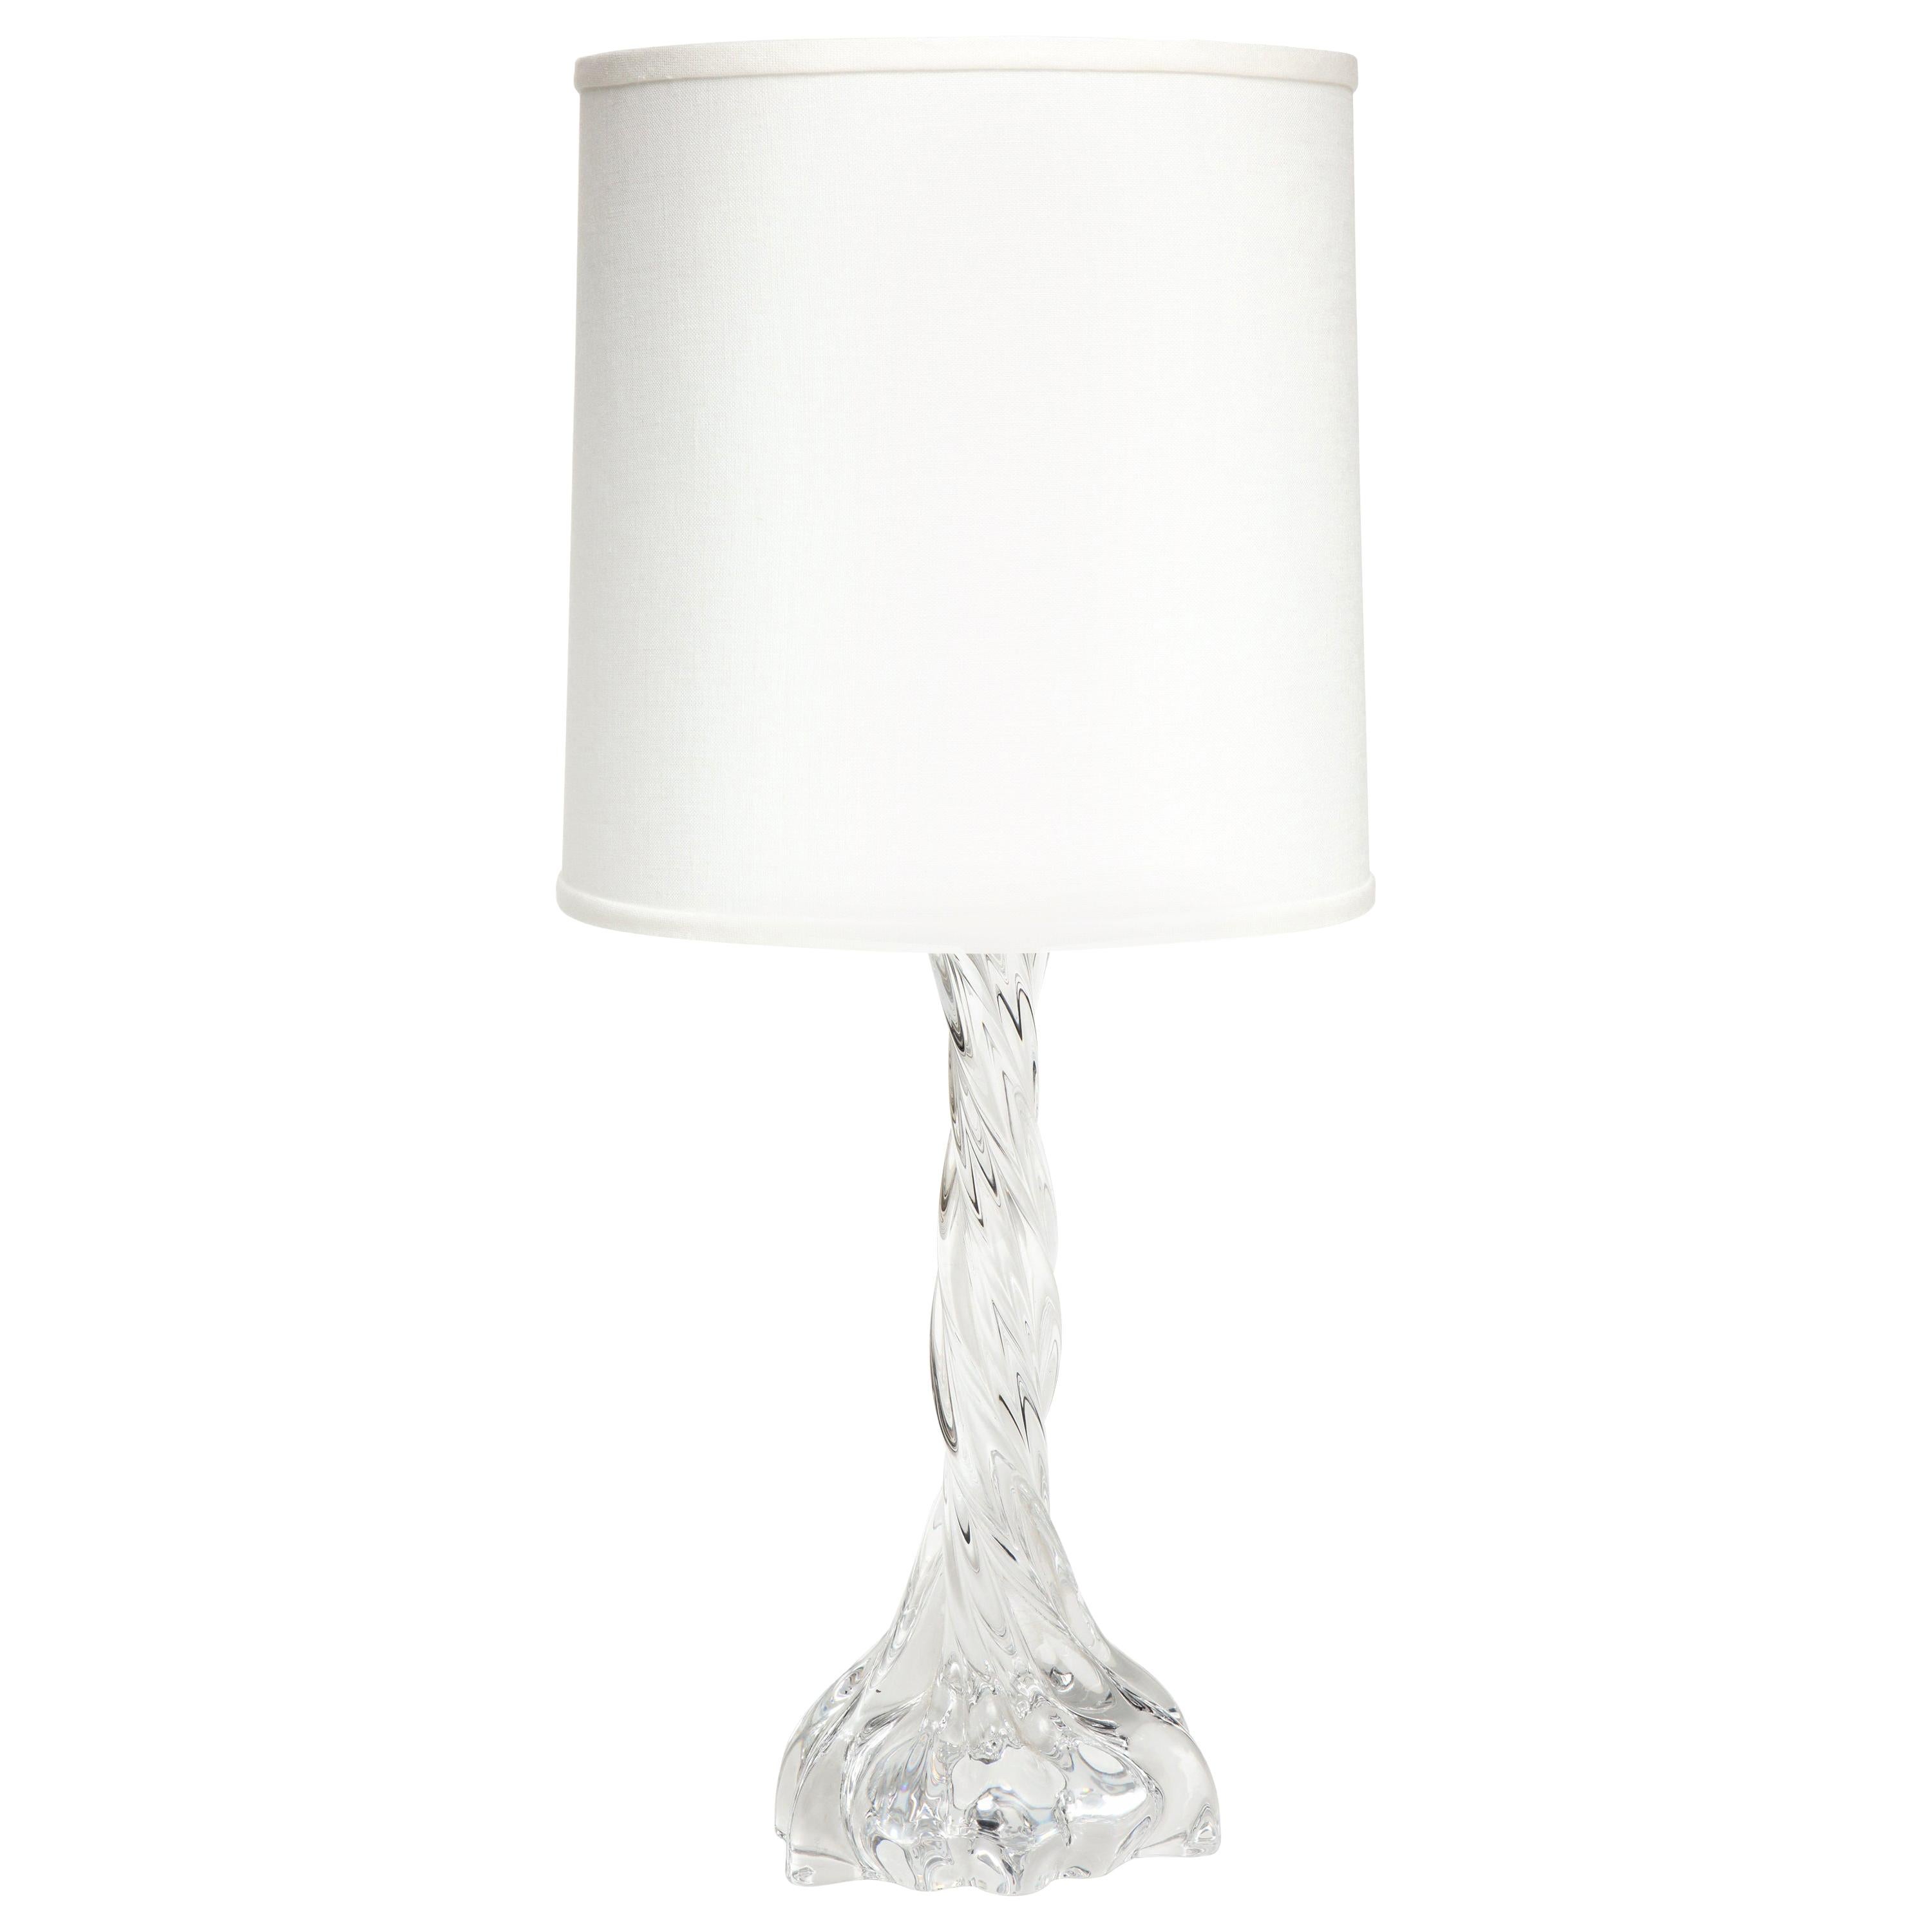 Baccarat Crystal Lamp Twisted Pattern, Baccarat Crystal Table Lamps